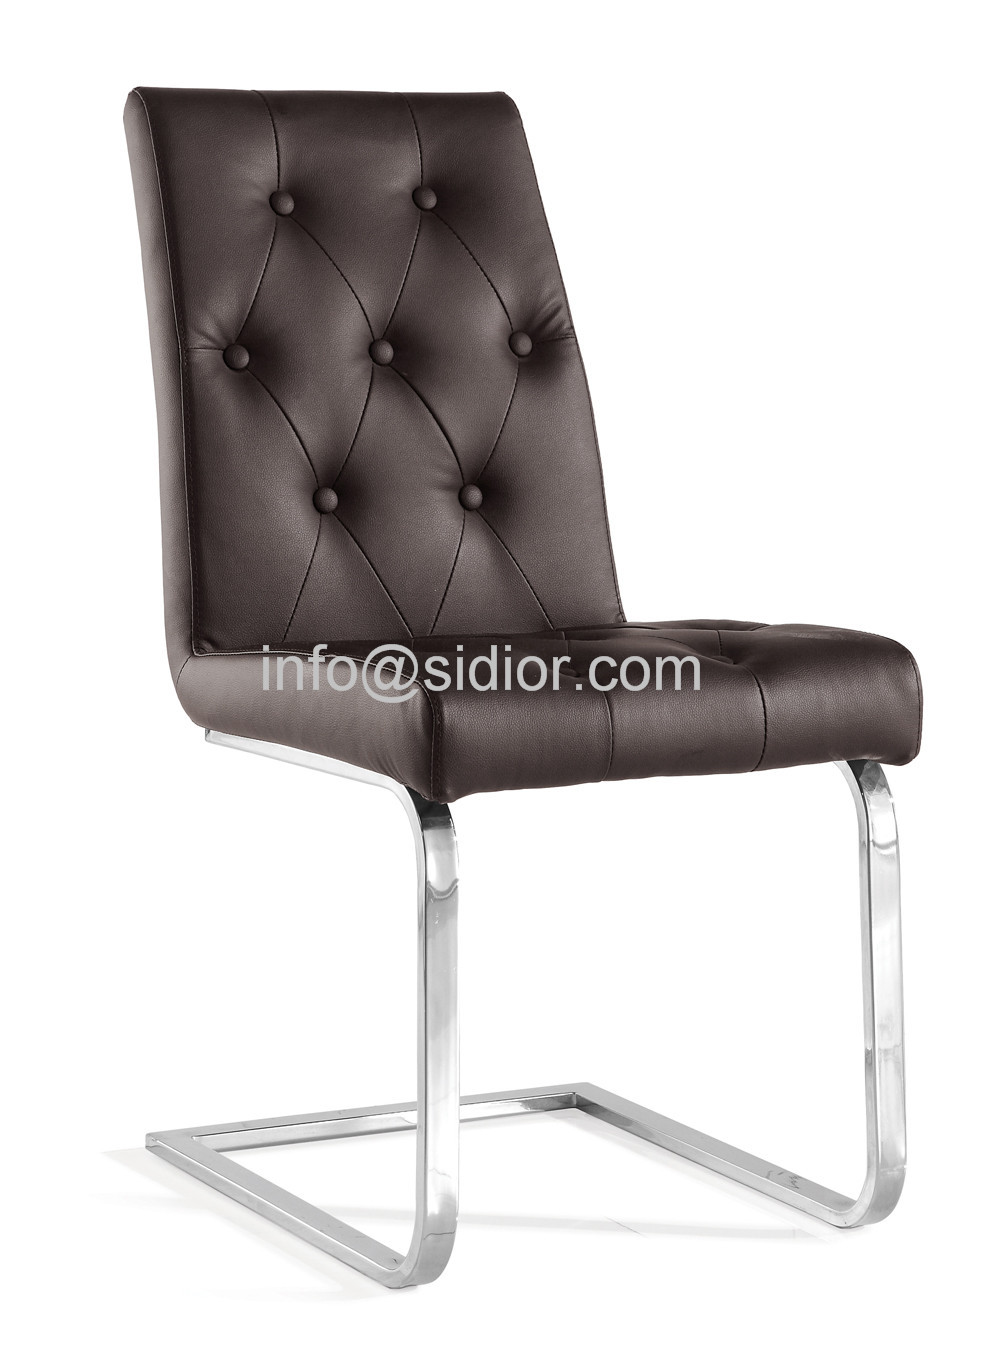 China SD-1015 modern restaurant stainless steel pu leather chair,visitor chair,dining room chair on sale